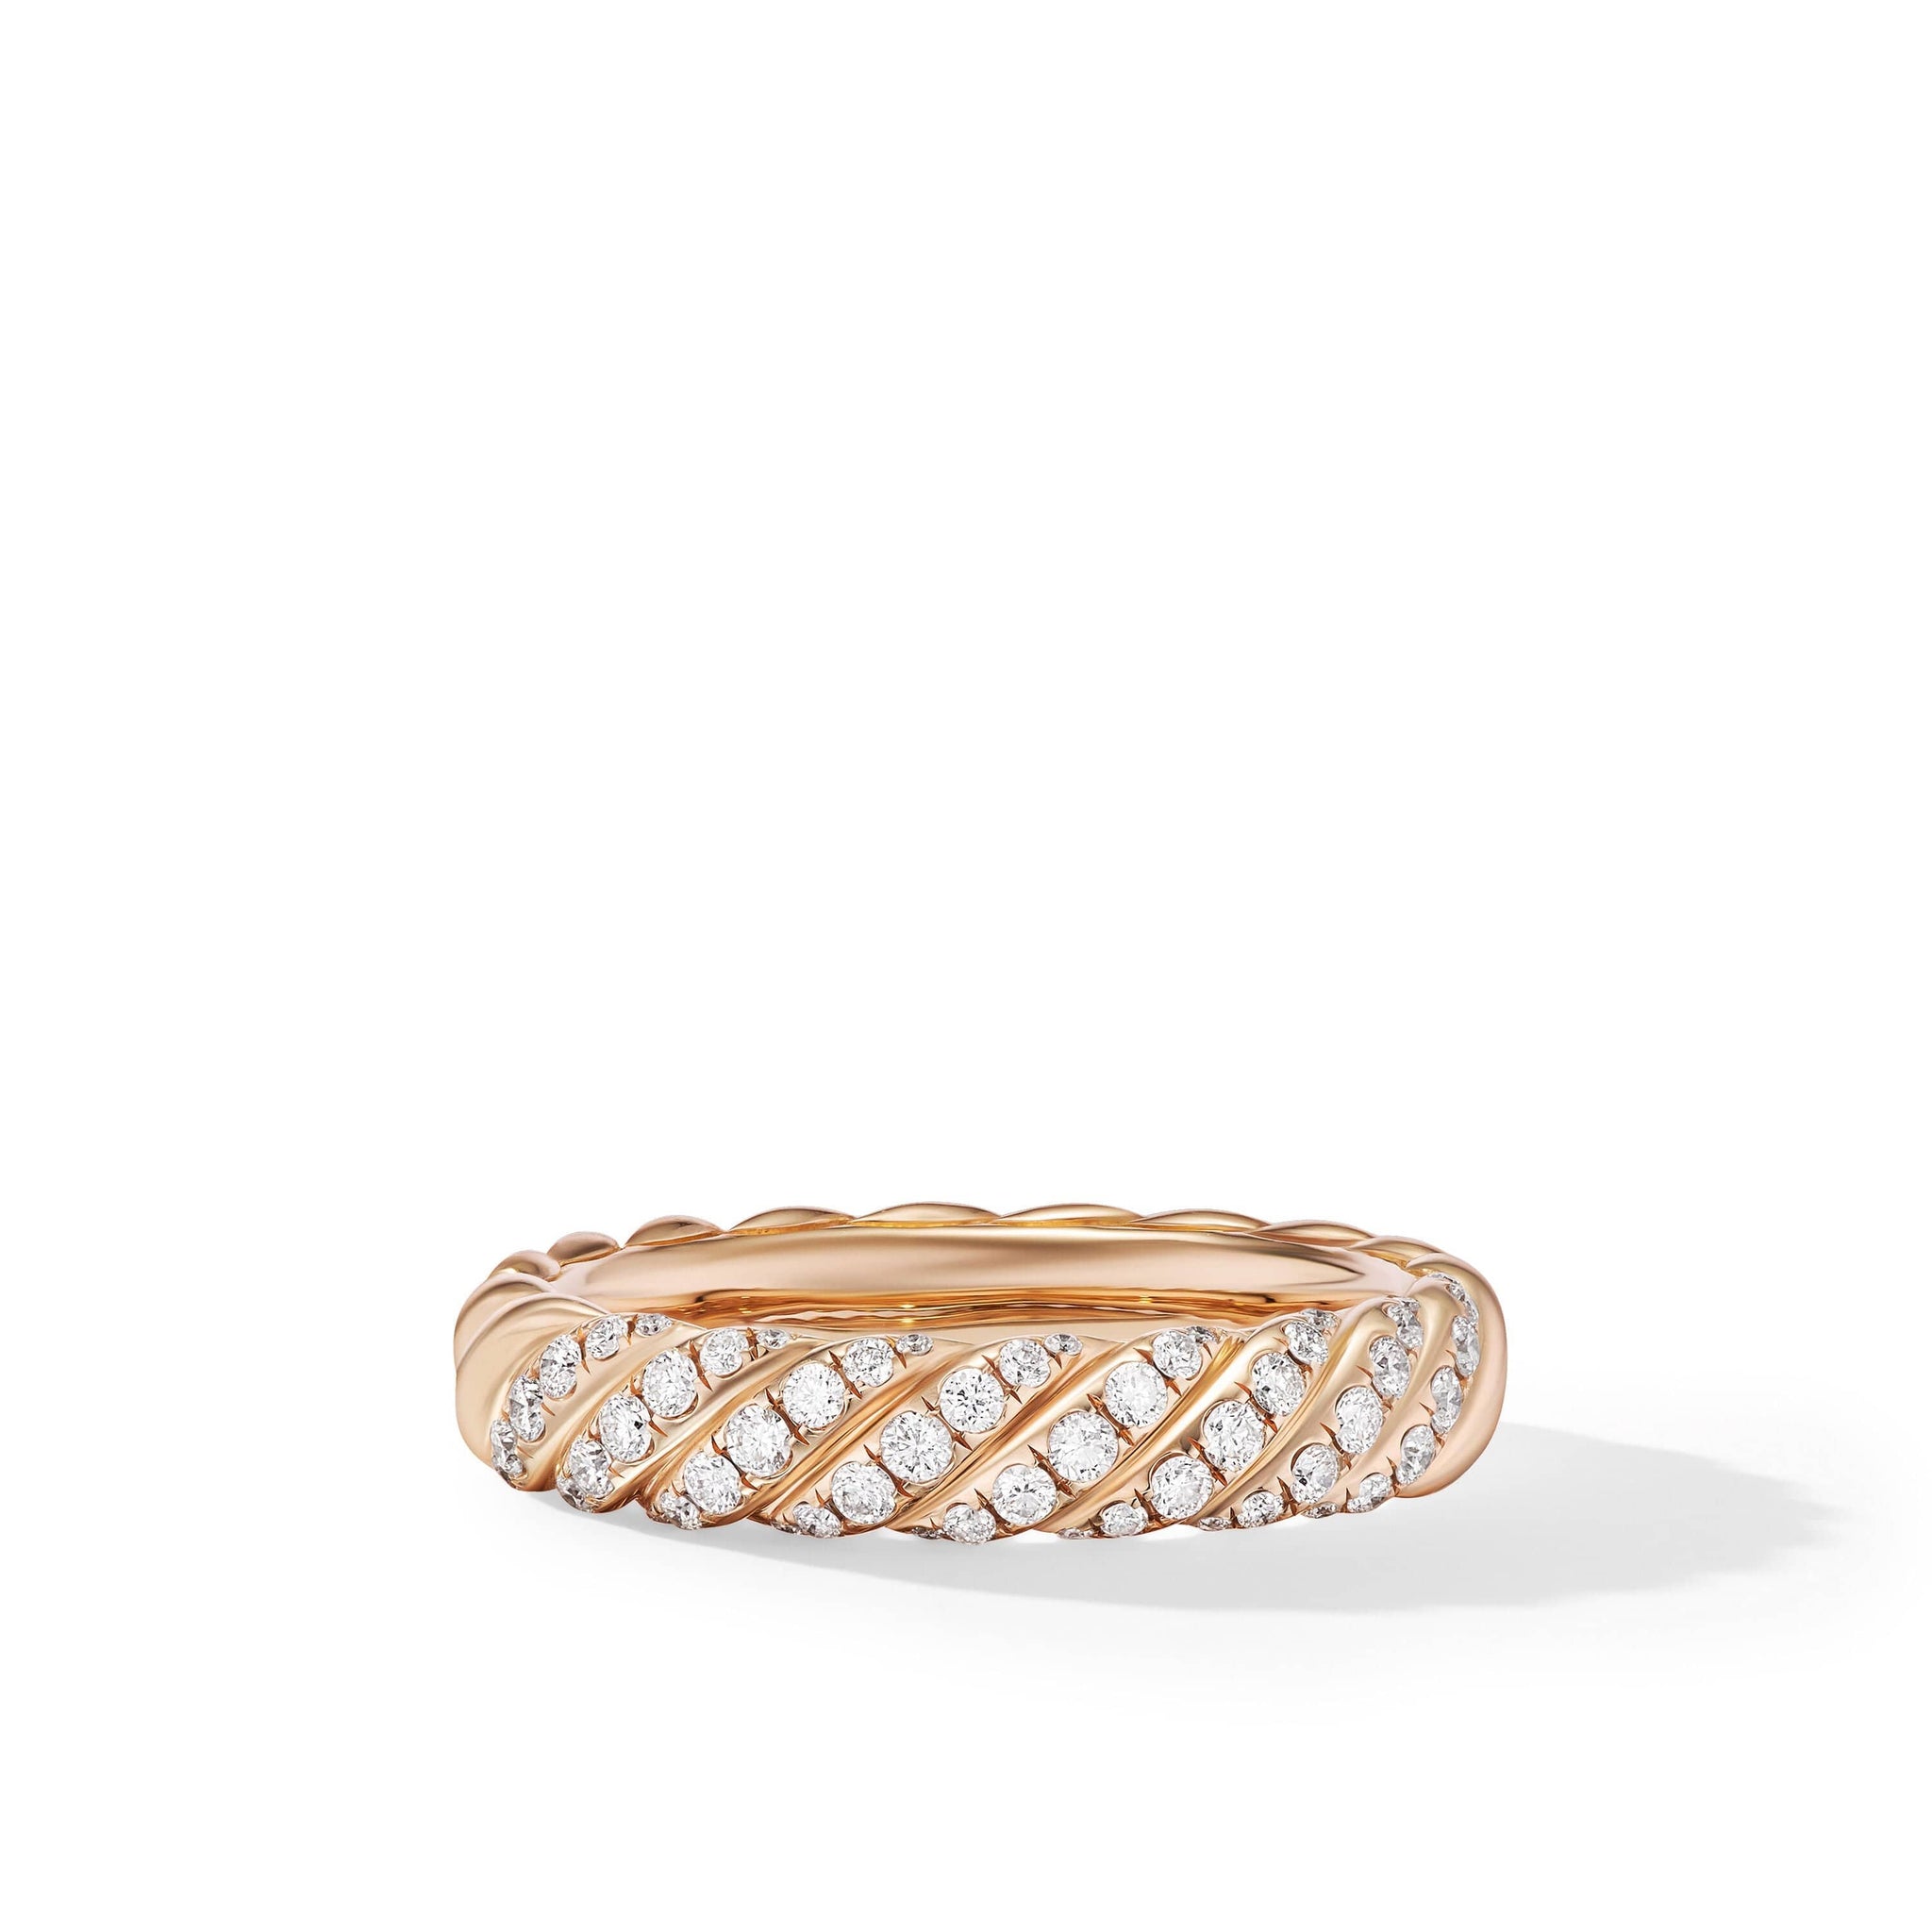 Sculpted Cable Bangle Bracelet in 18K Yellow Gold with Diamonds